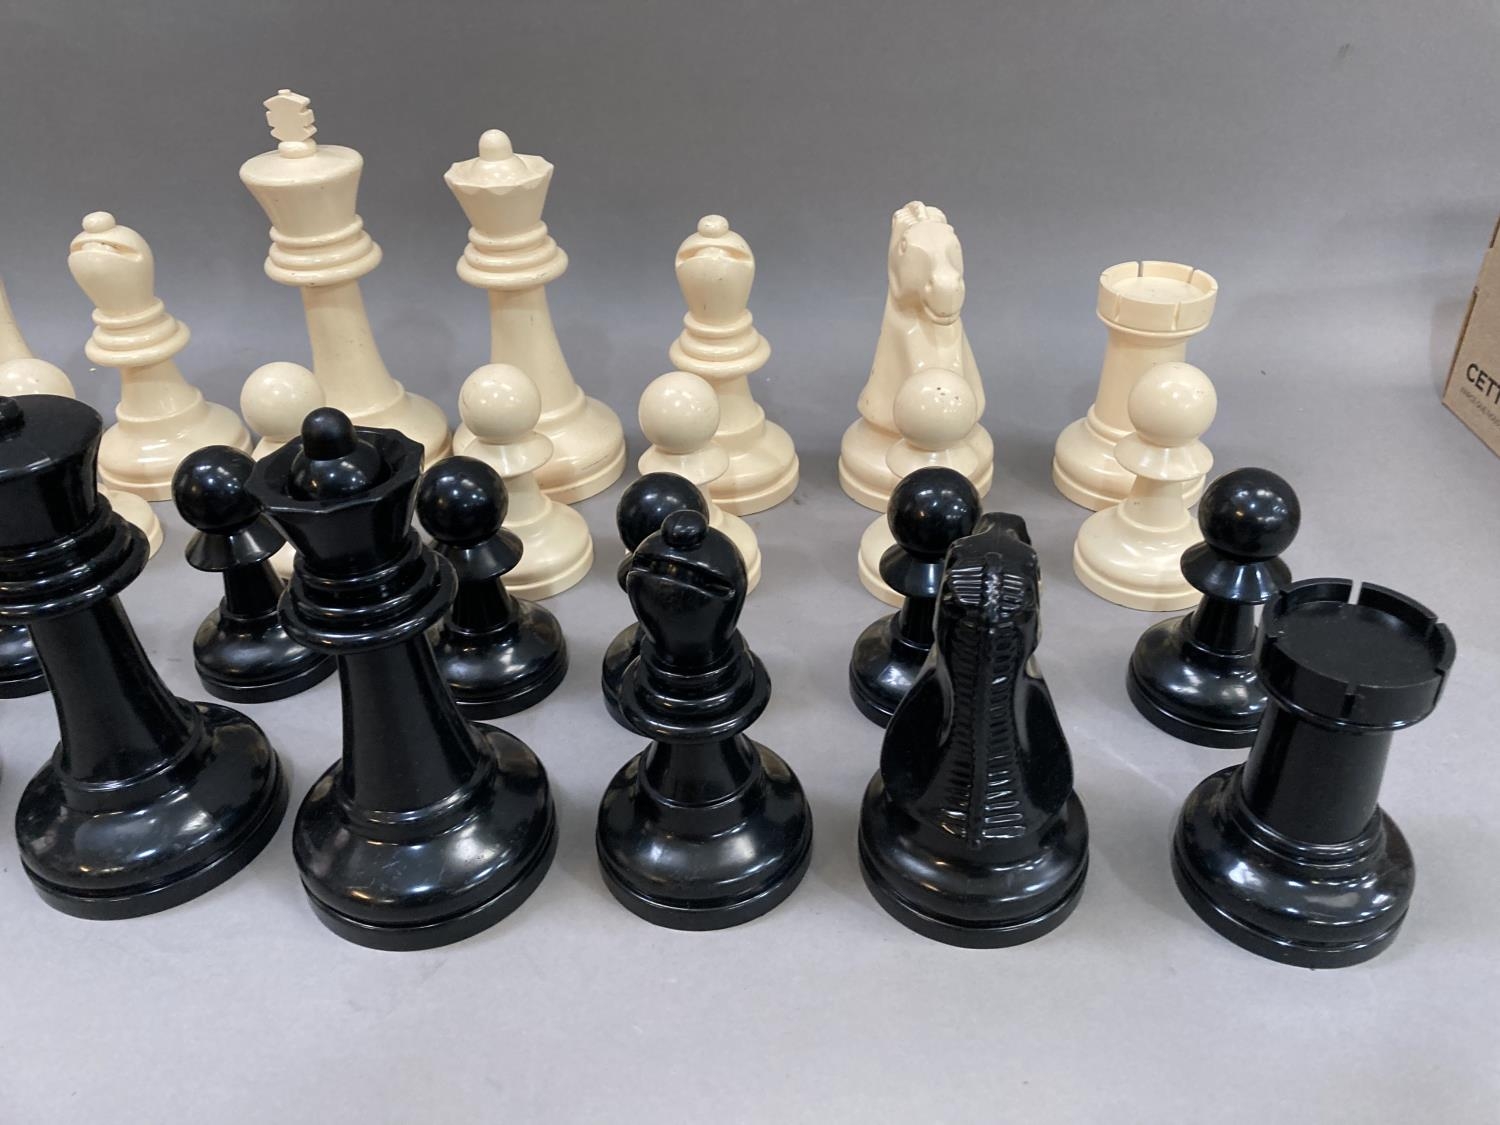 A outdoors chess set in cream and black plastic, the king measuring 21cm high - Image 2 of 3